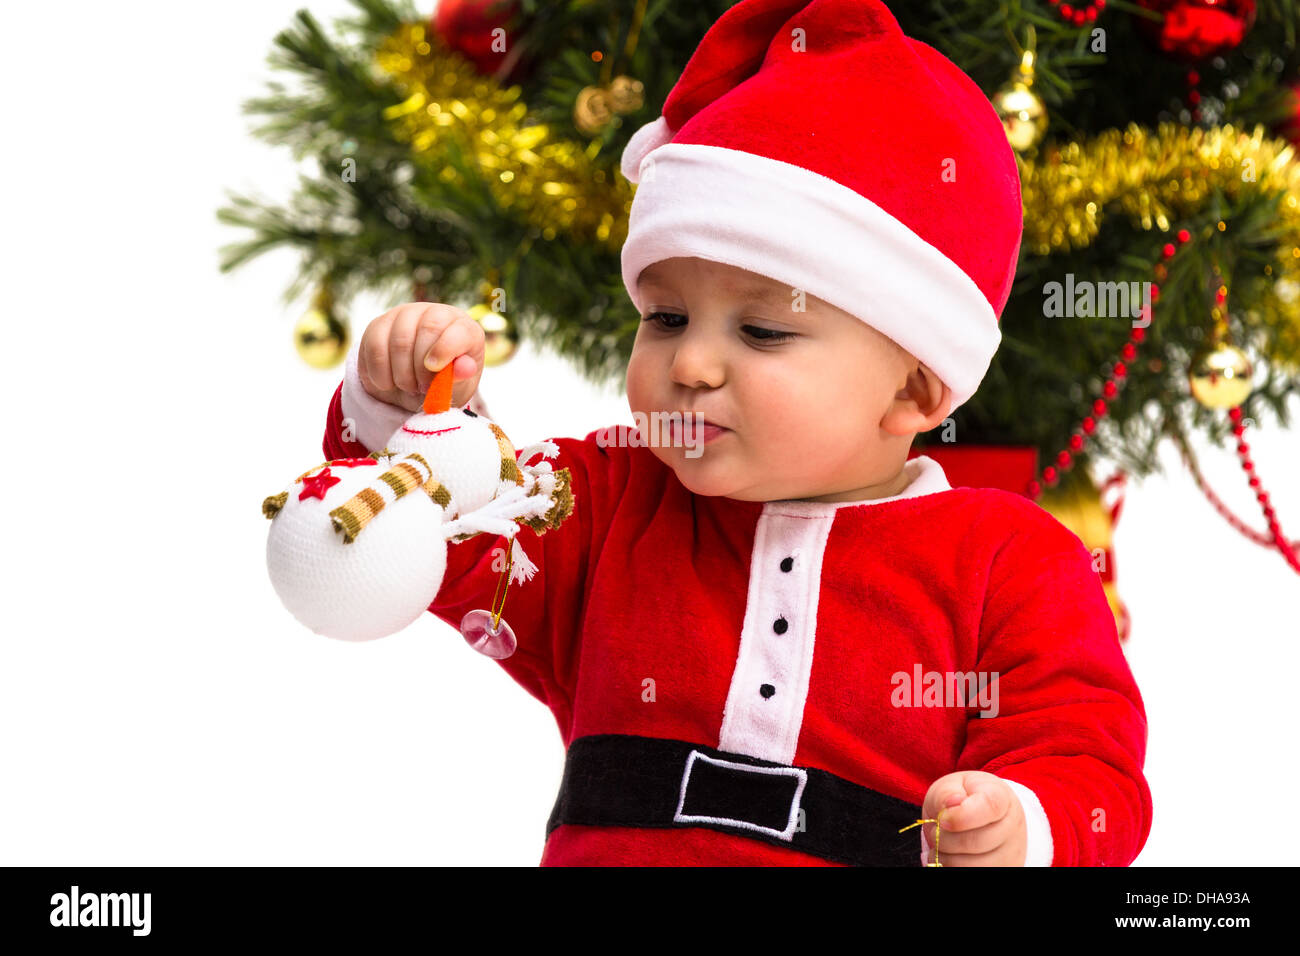 Infant SANTA HAT Christmas Holiday Red & White New 